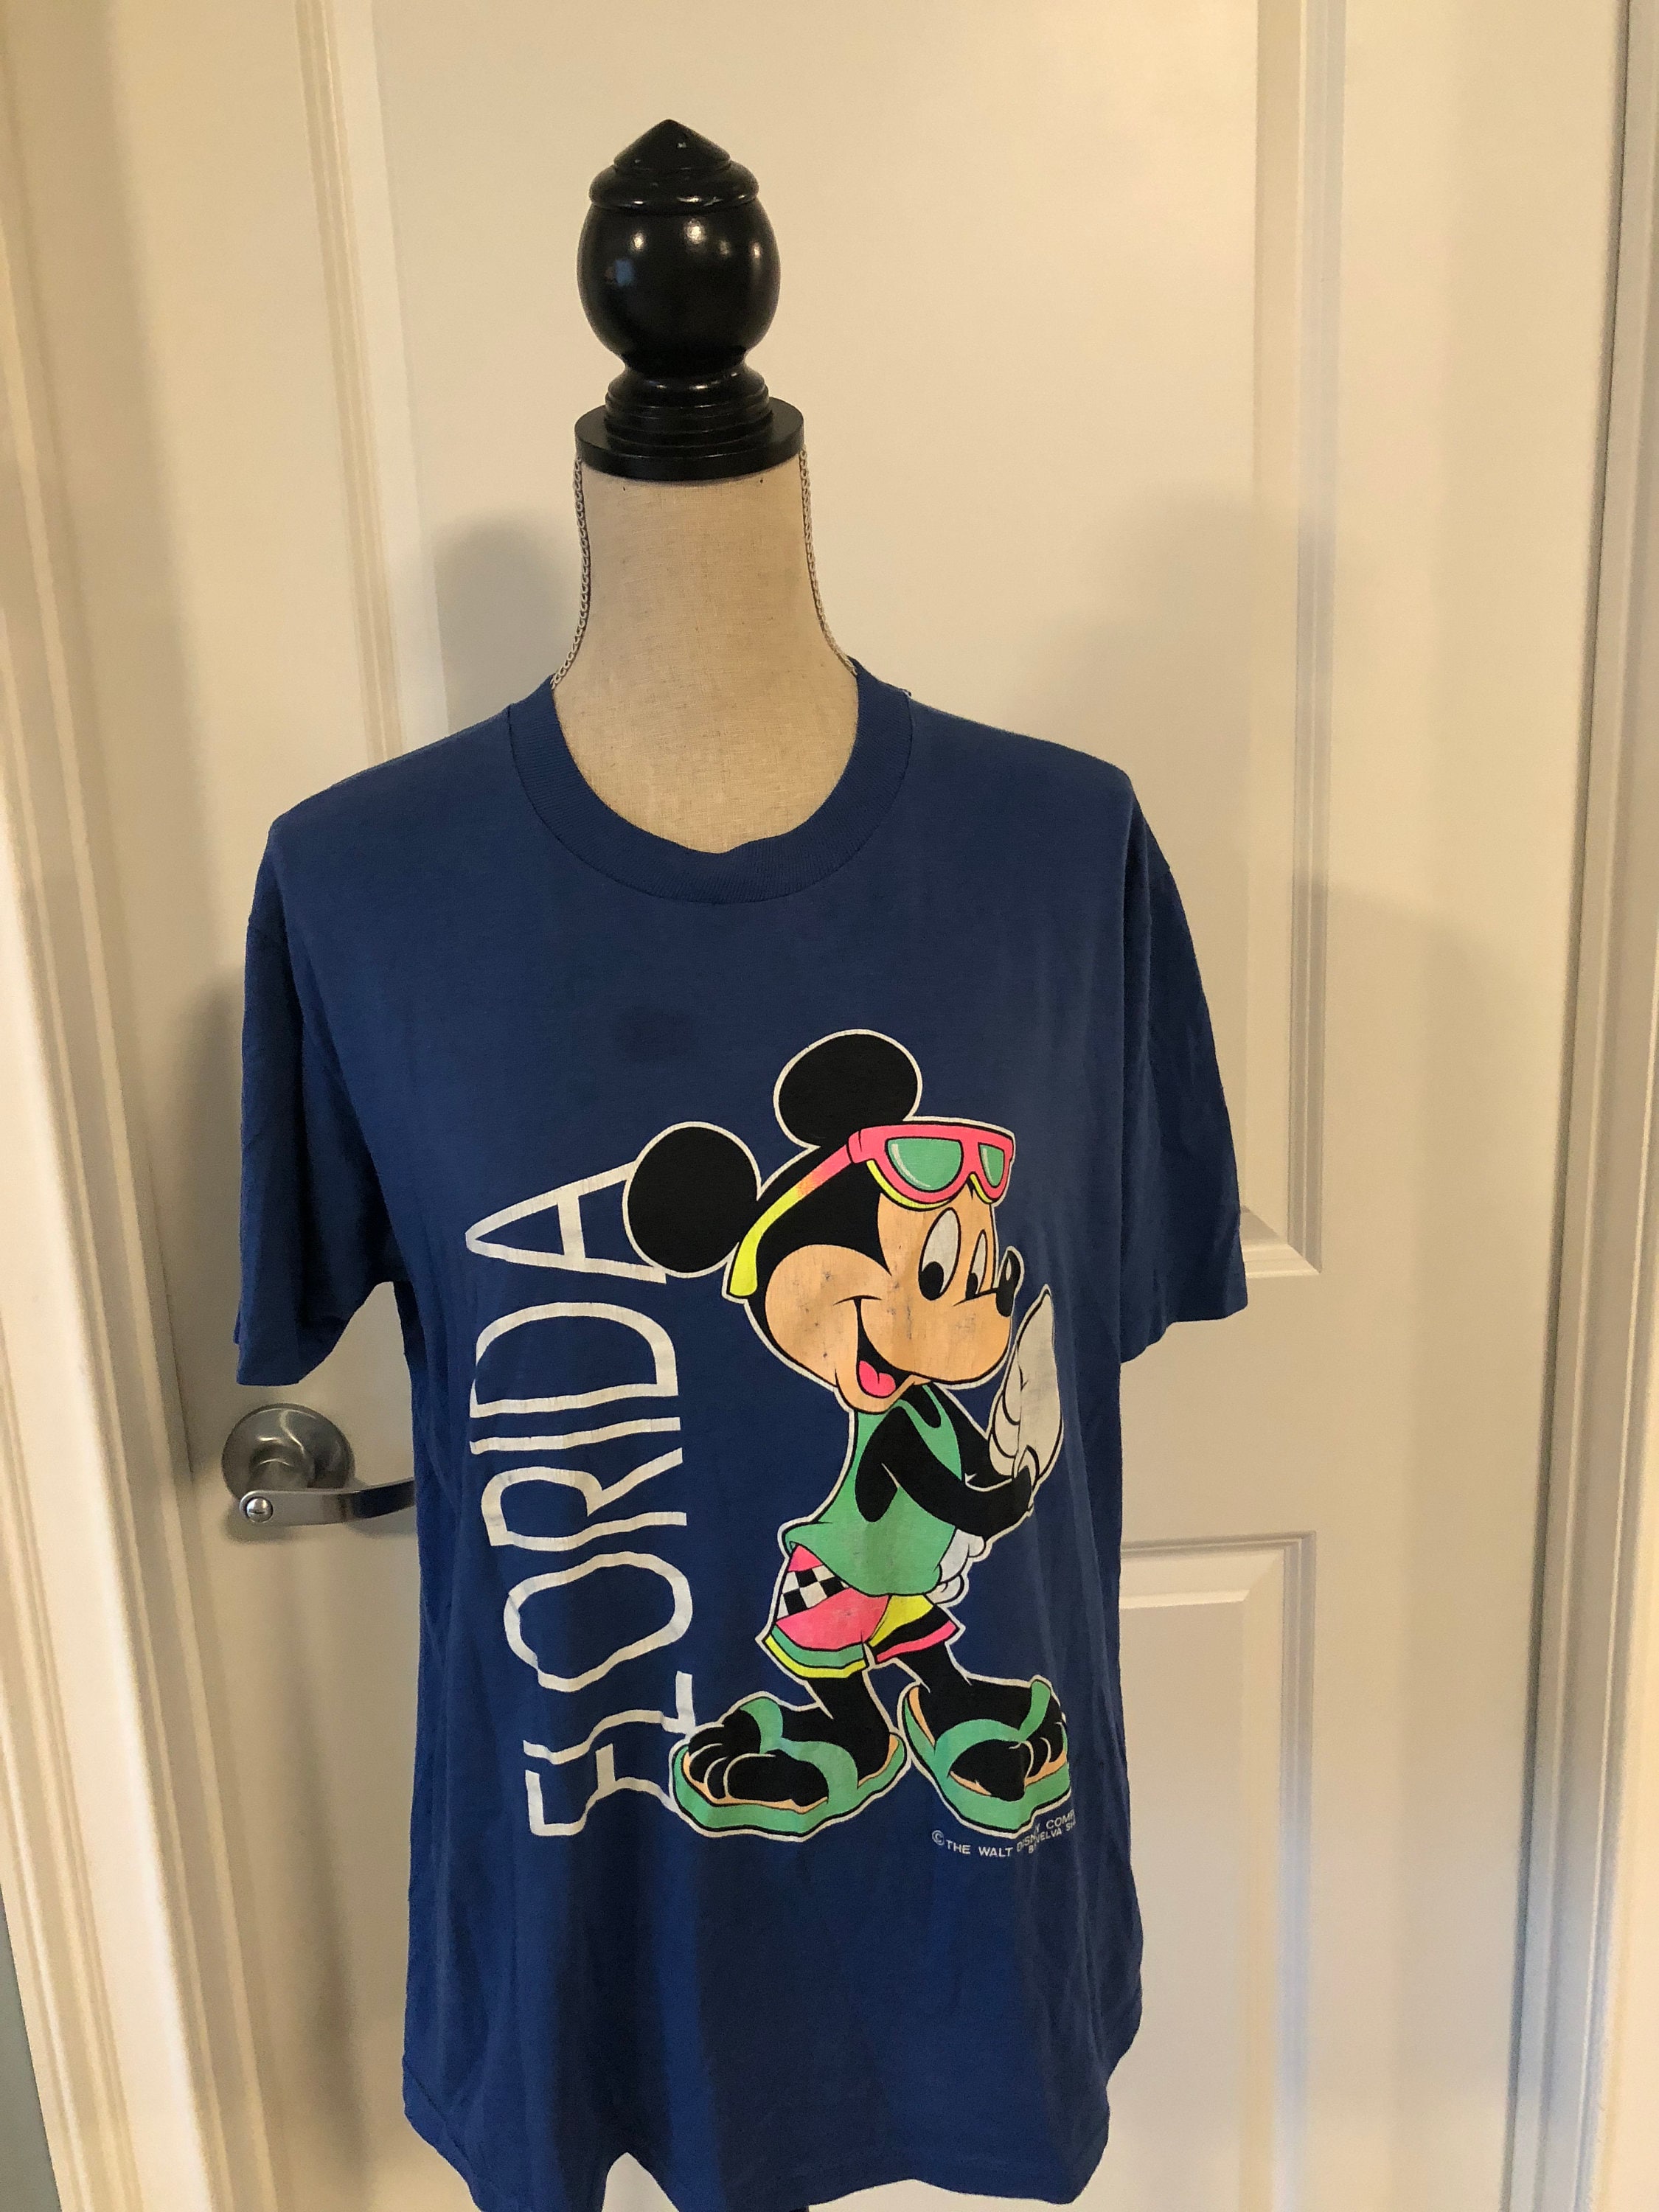 Disney Mickey Mouse Chicago Cubs T-shit blue size Small